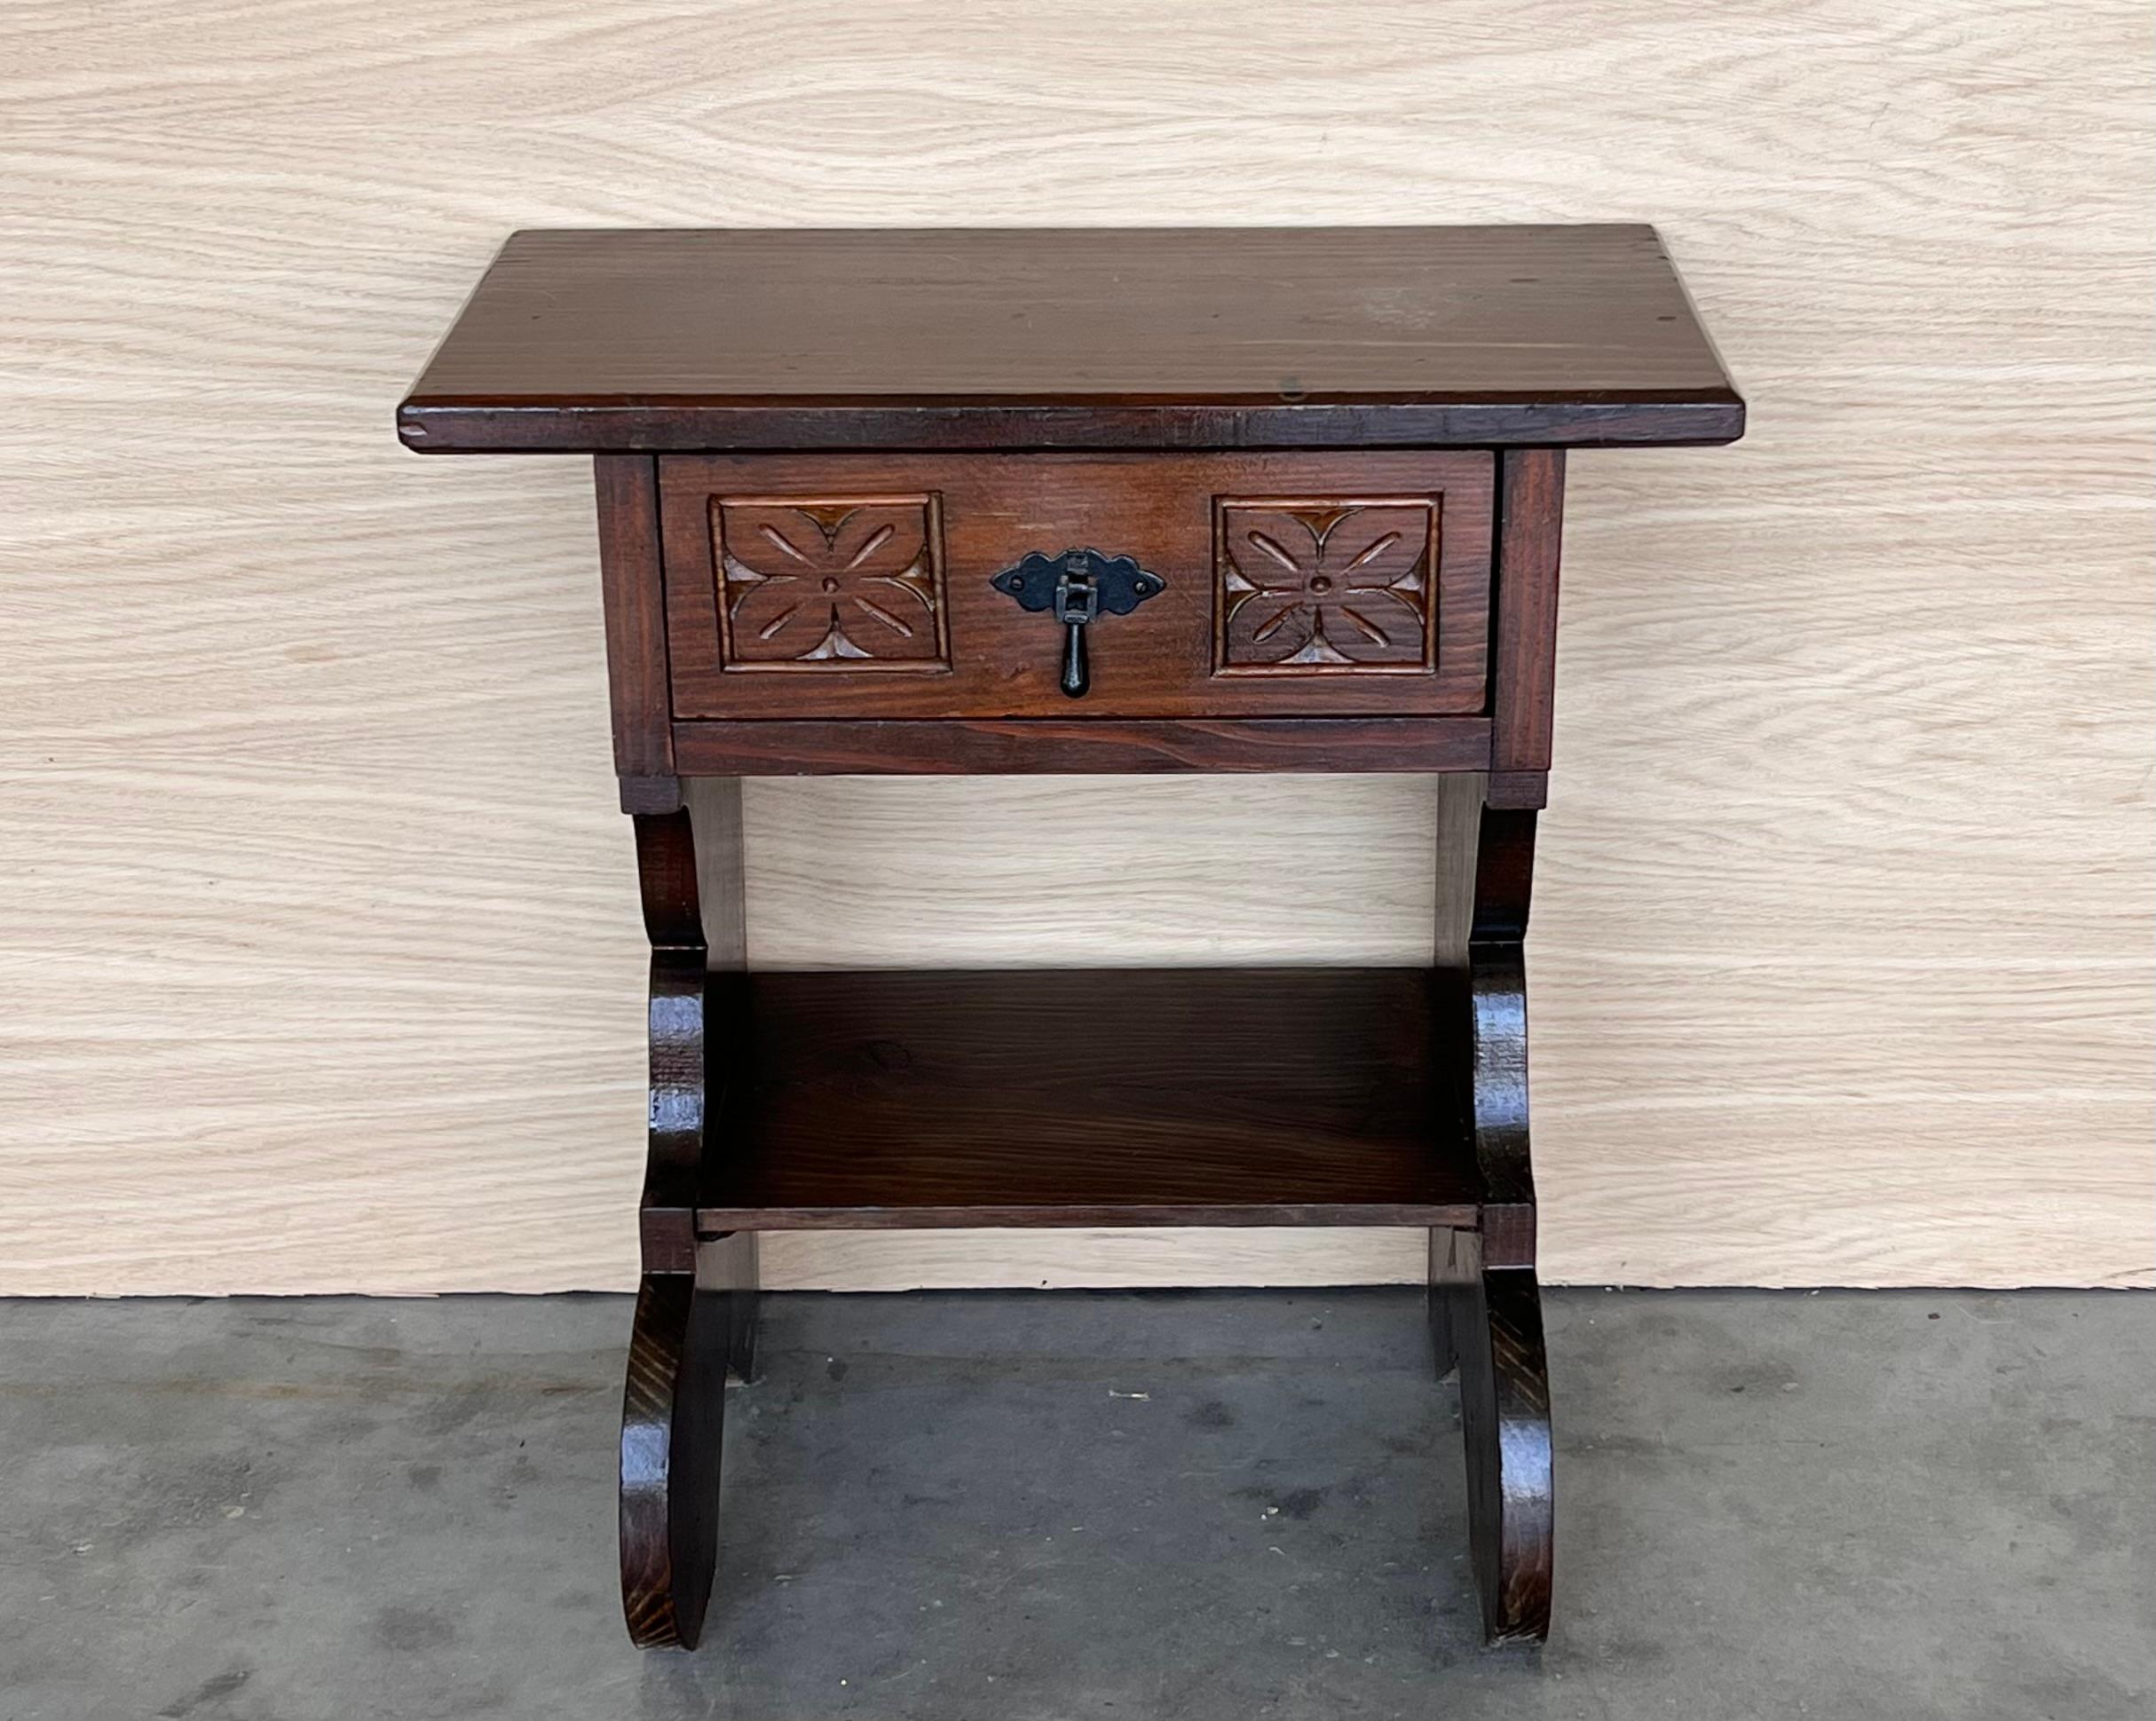 20th century Pair of Spanish nightstands with one drawer . The table has beautiful carved drawers with original color contrast. Beautiful tables that you can use like a nightstands or side tables, end tables or table lamp, desk or console.